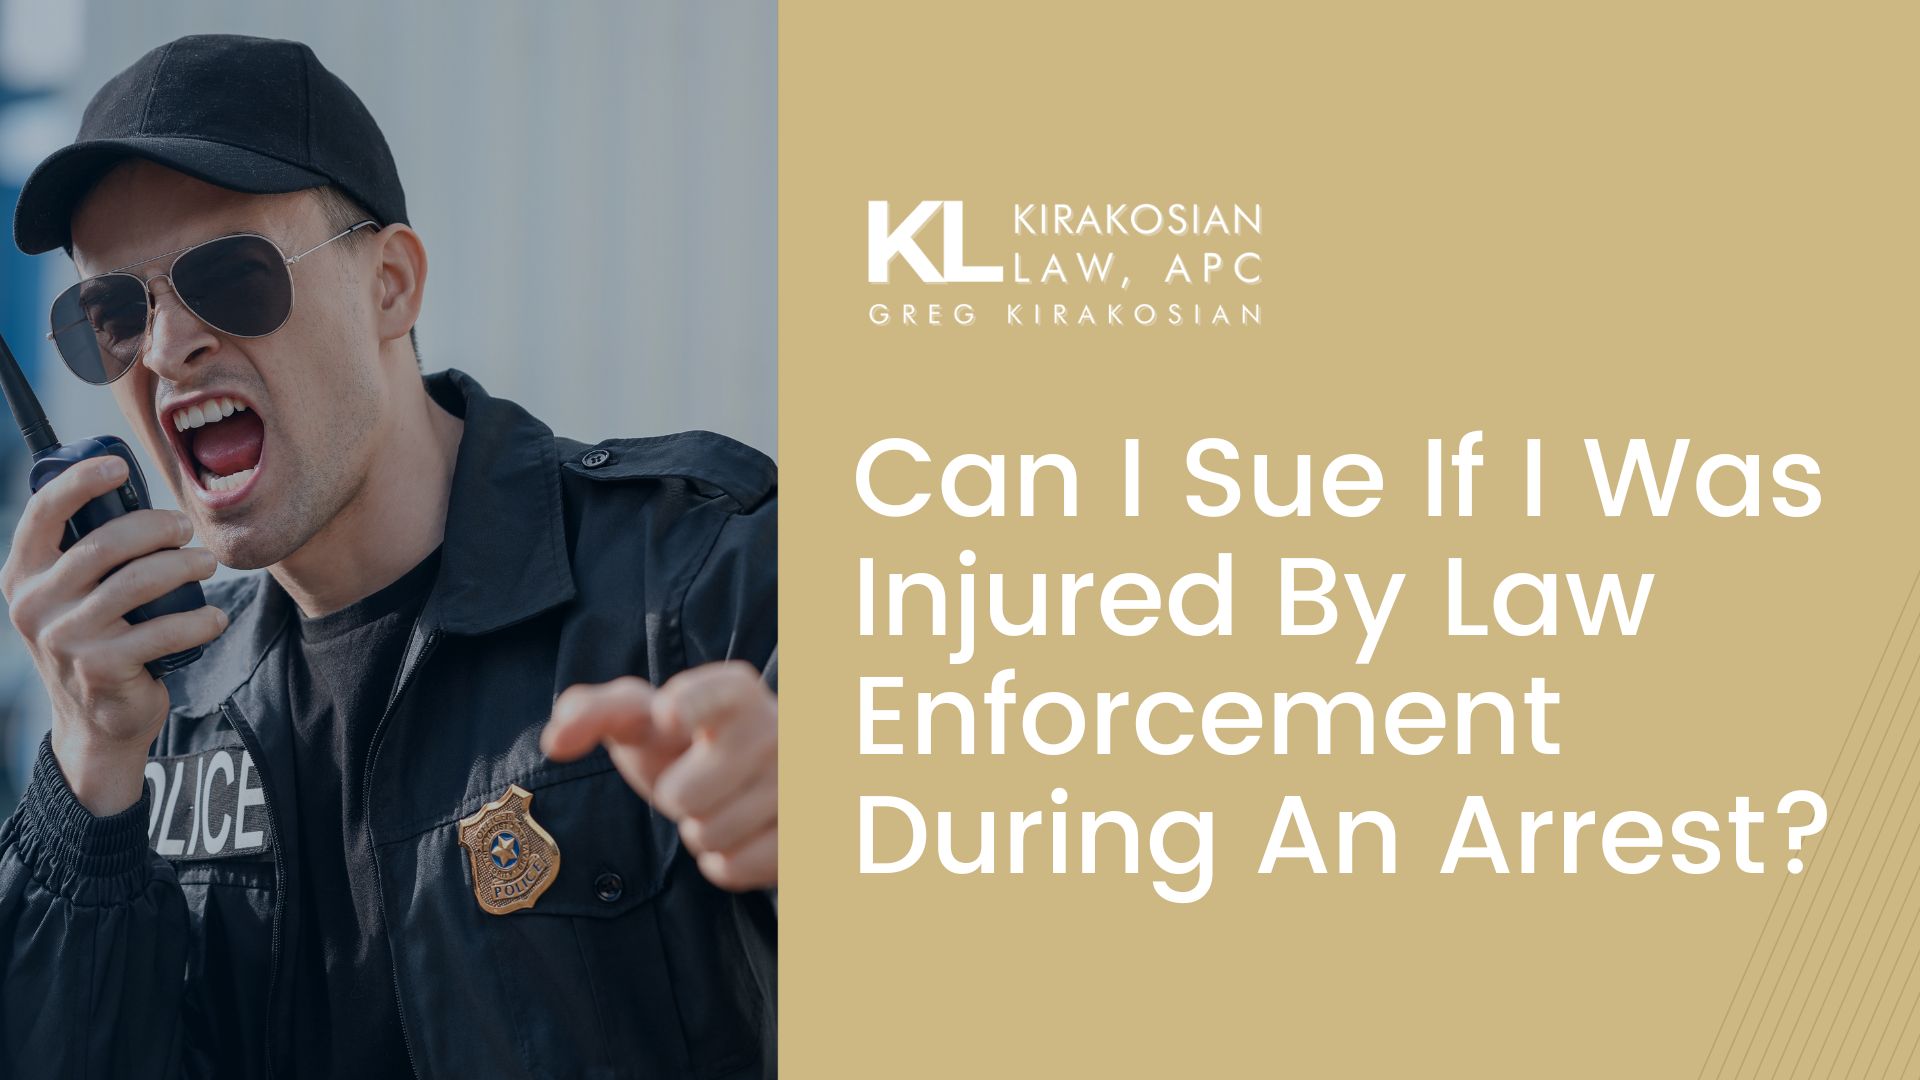 Can I sue if I was injured by law enforcement during an arrest?